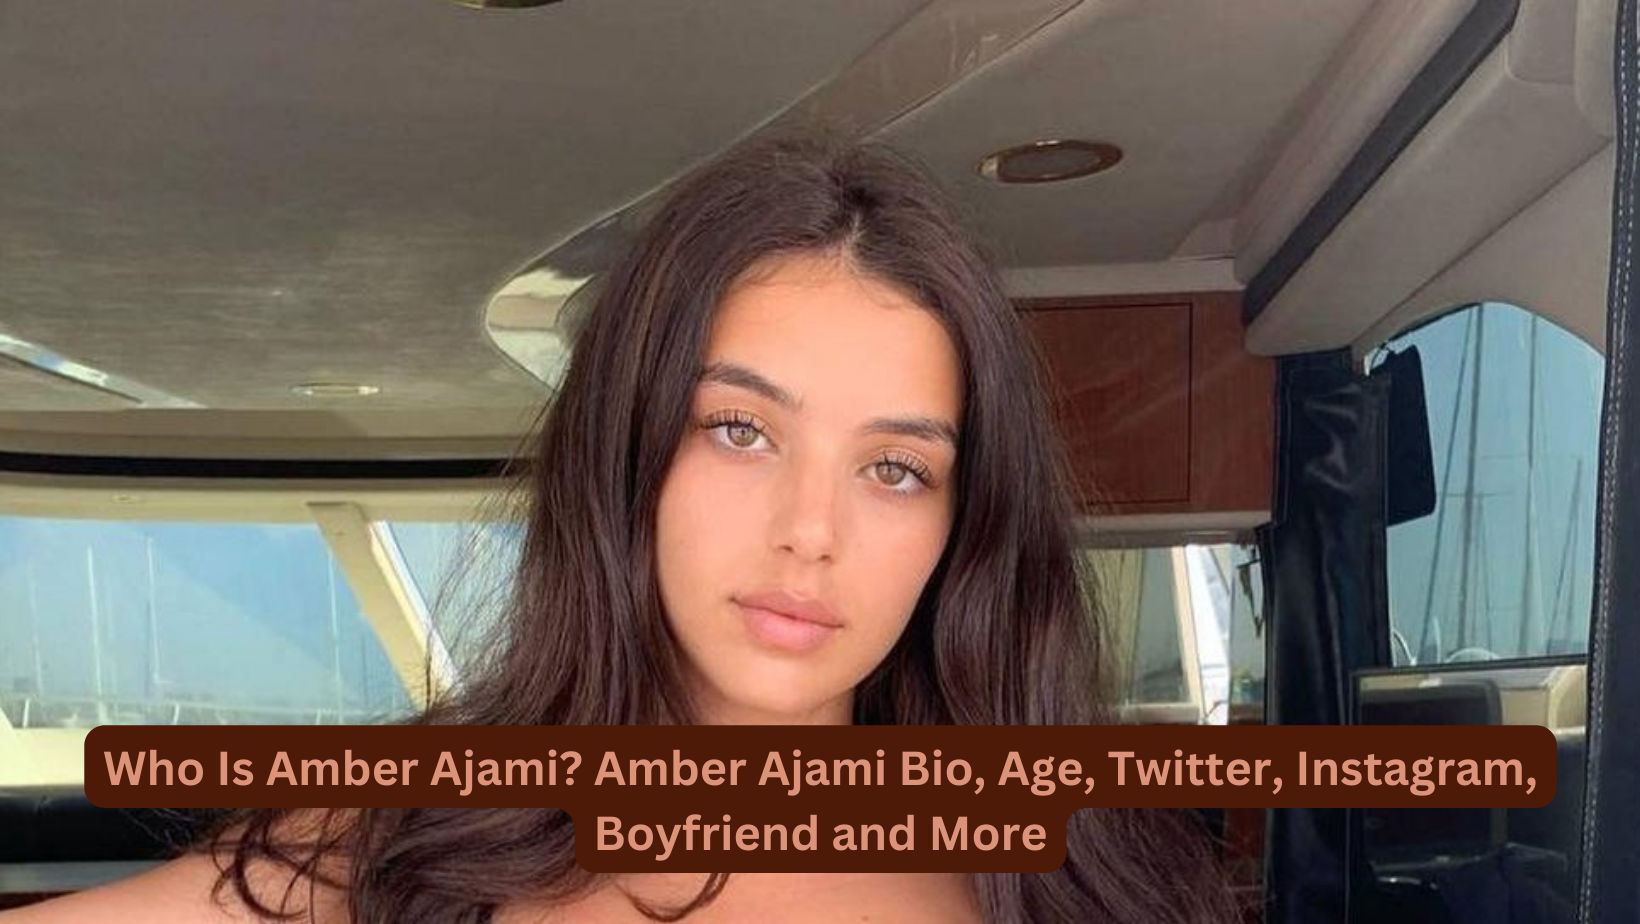 Amber Ajami the Tik Tok Star what does her life look like?